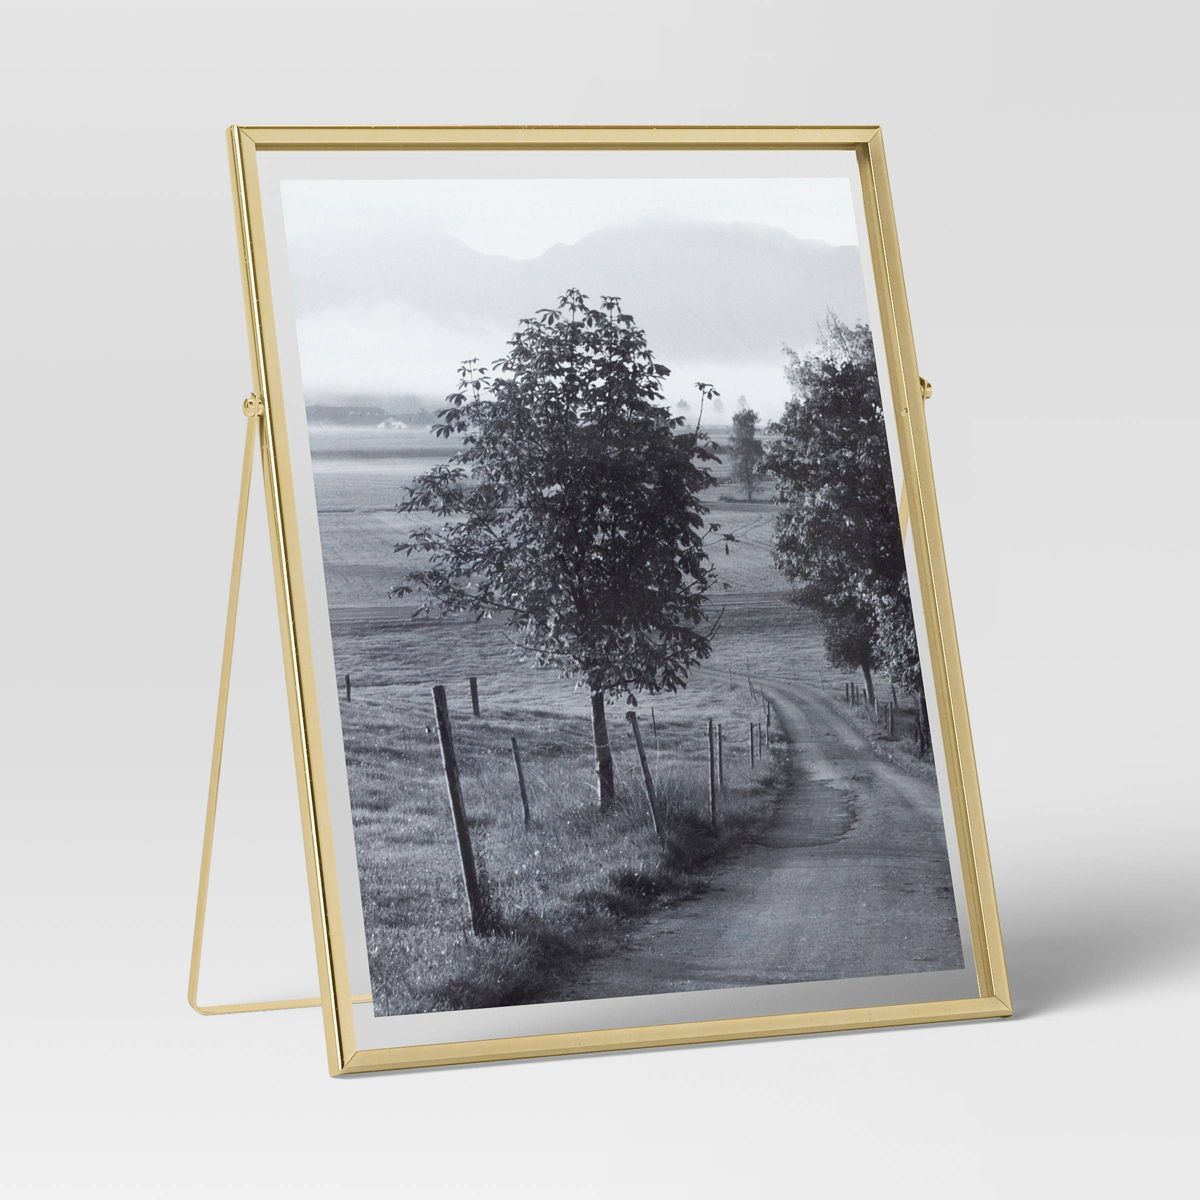 9" x 11" Float to 8" x 10" Linear Metal Easel Single Image Frame Brass - Threshold™ | Target